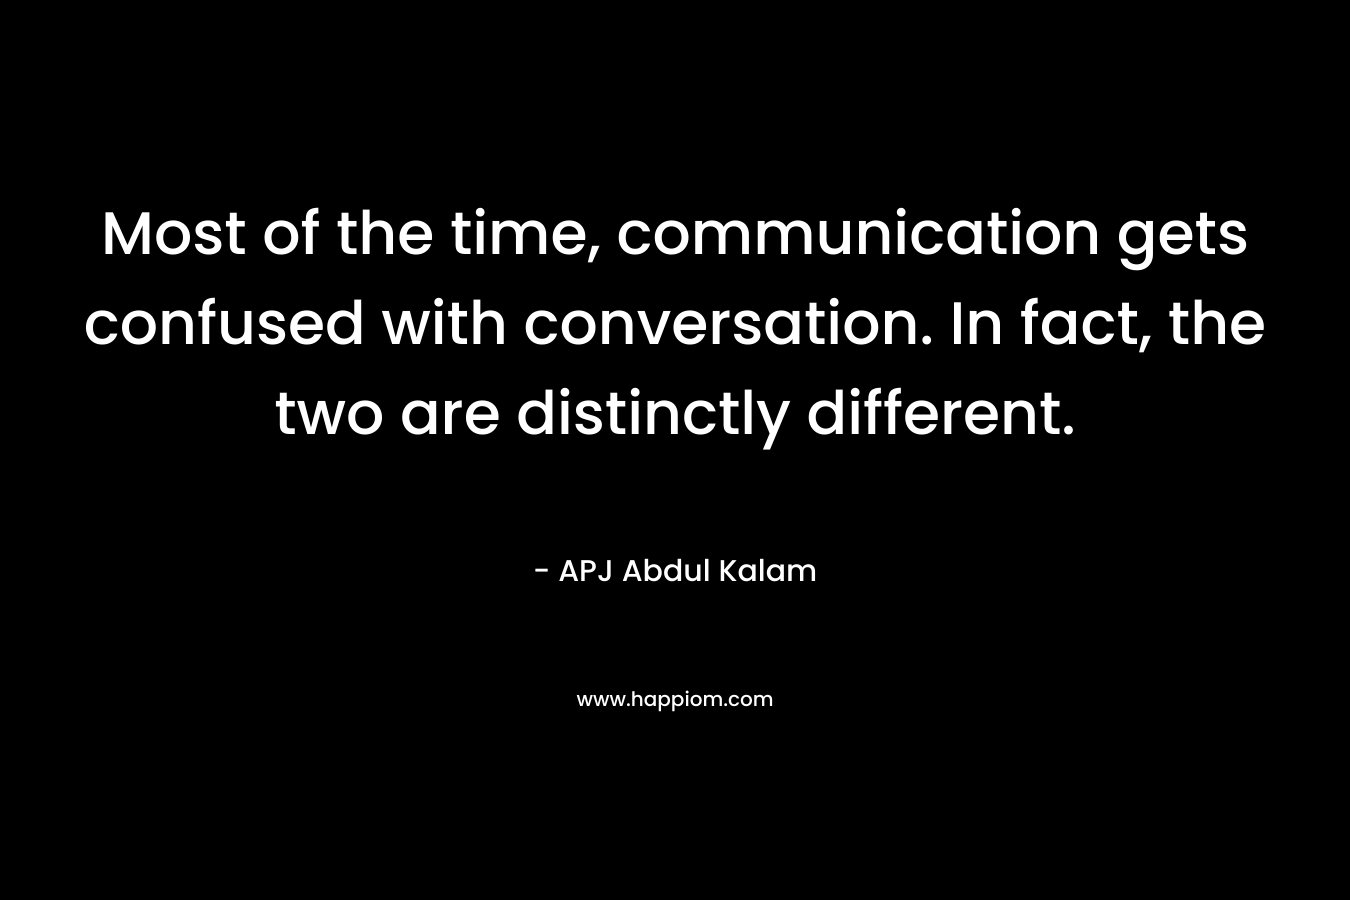 Most of the time, communication gets confused with conversation. In fact, the two are distinctly different.